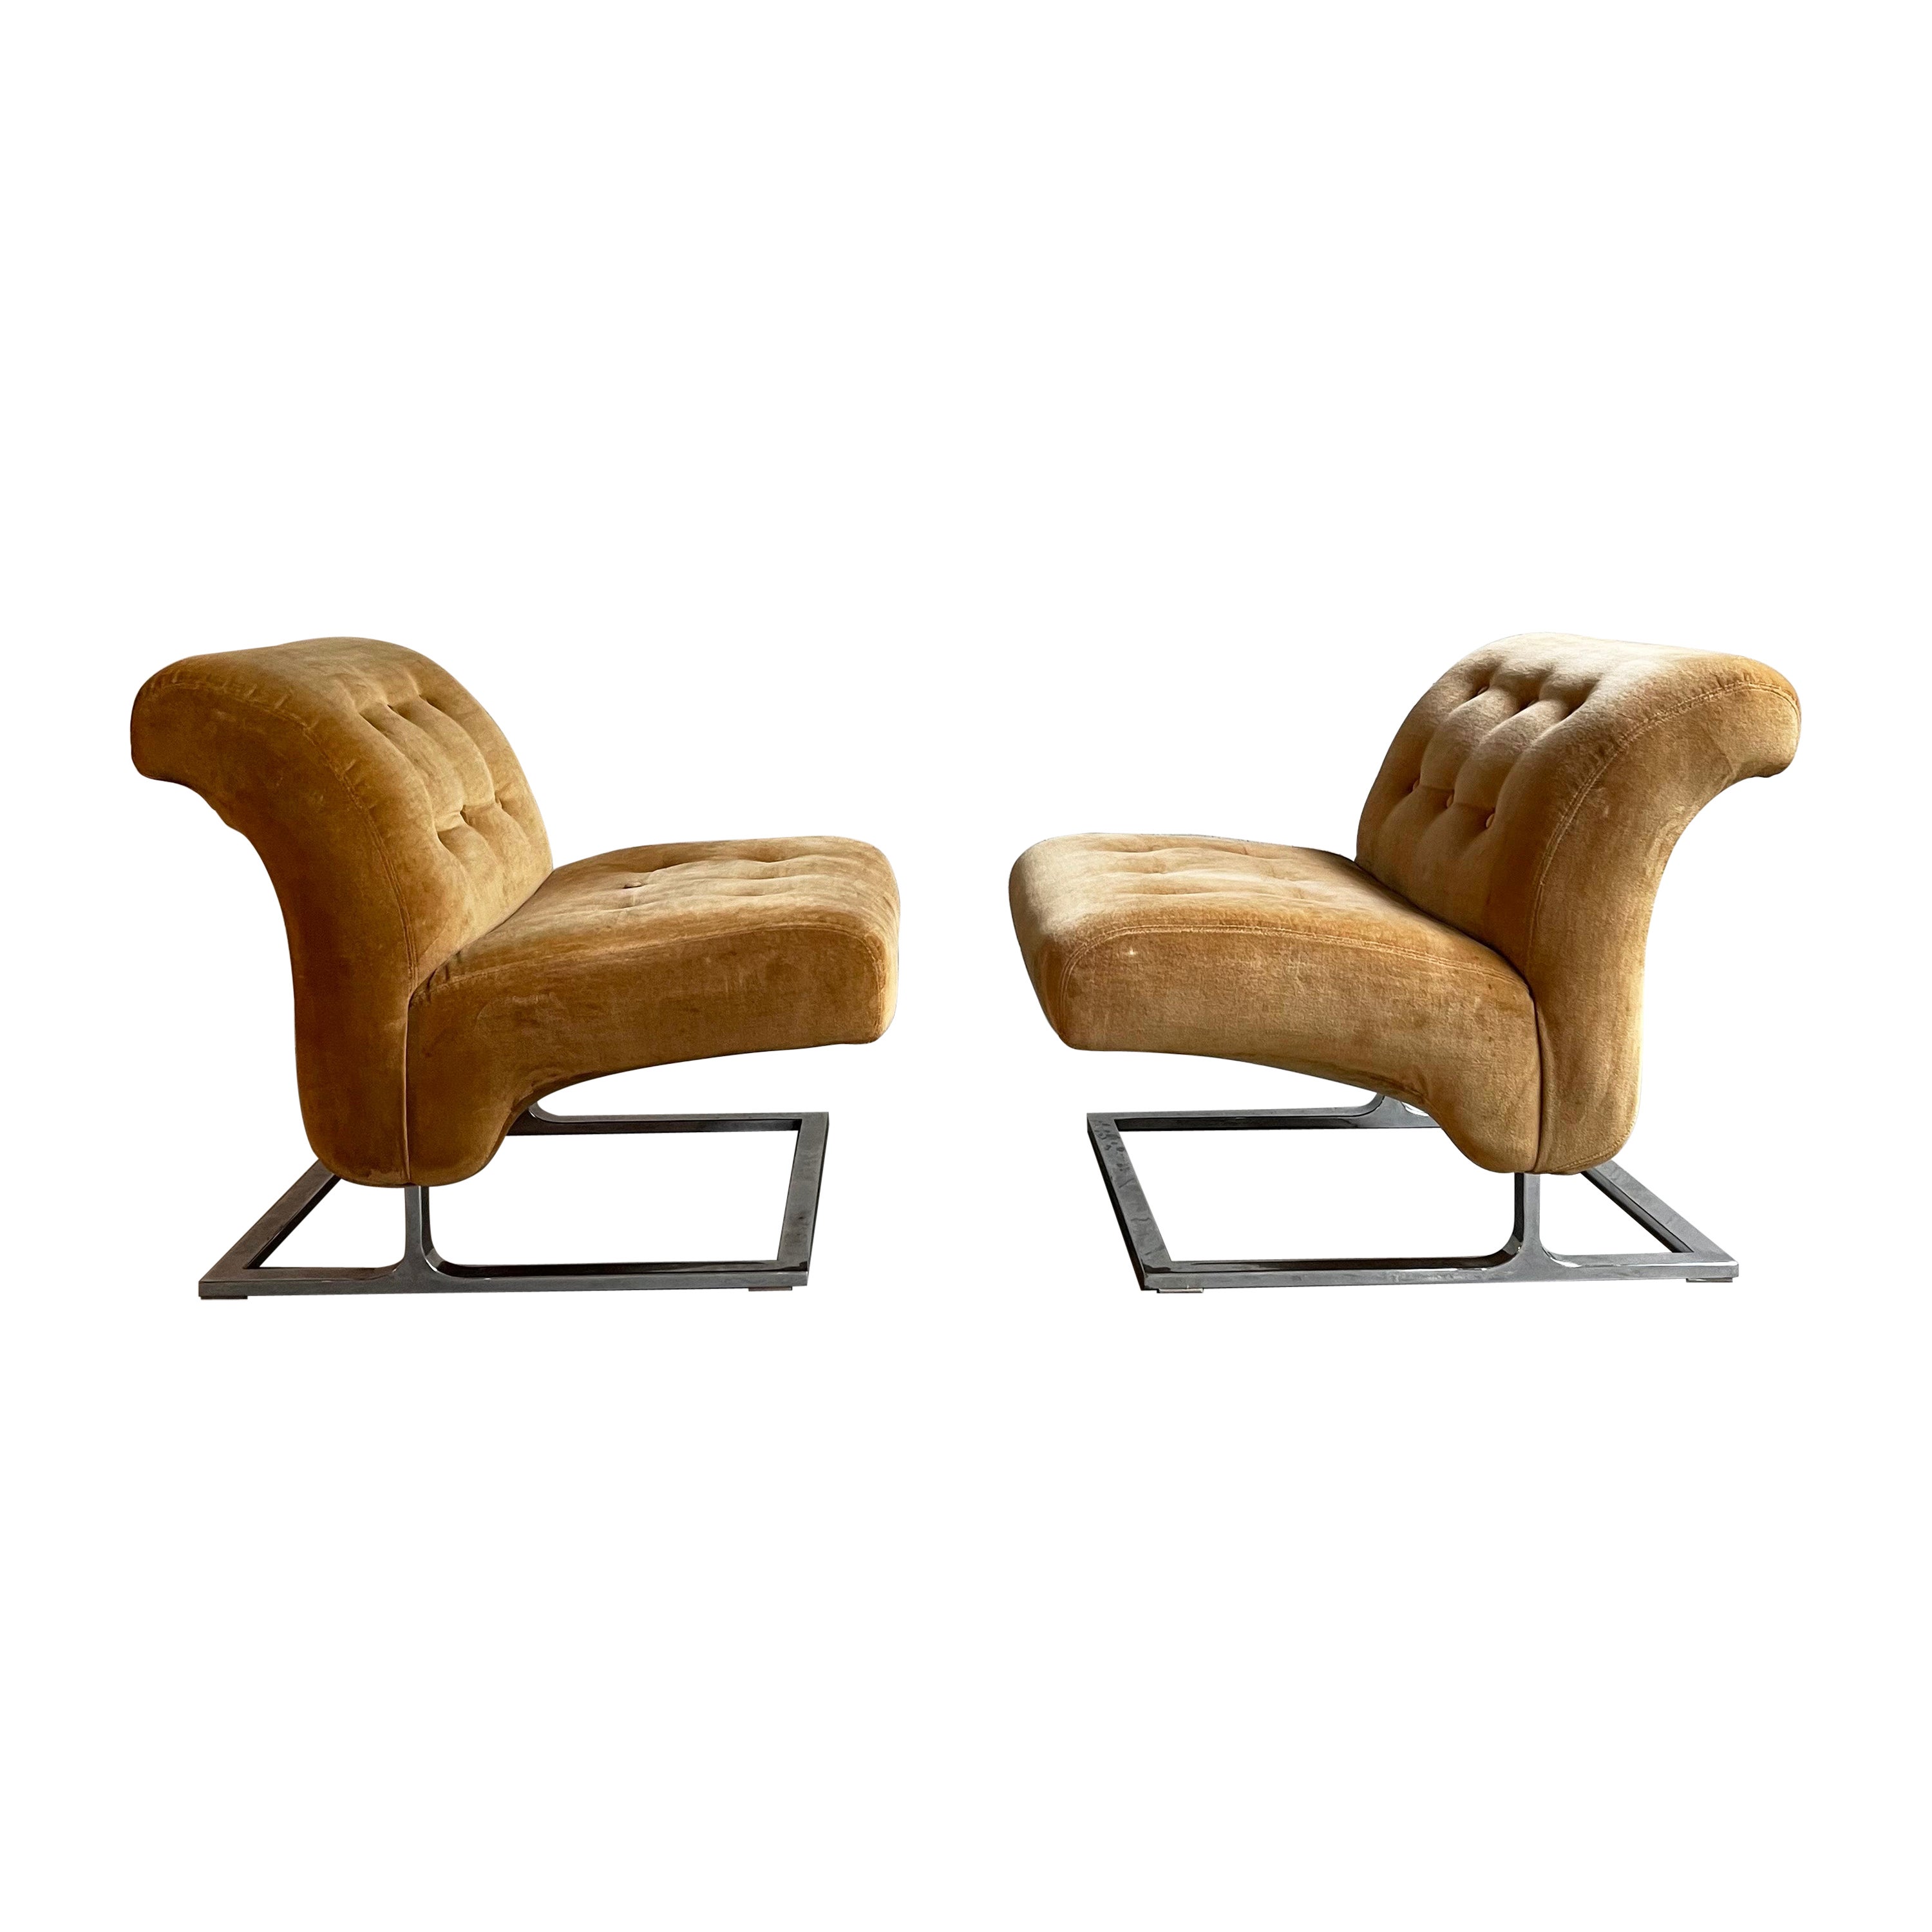 Pair Of Mid-Century Modern Chrome Cantilever Slipper Lounge Chairs For Sale